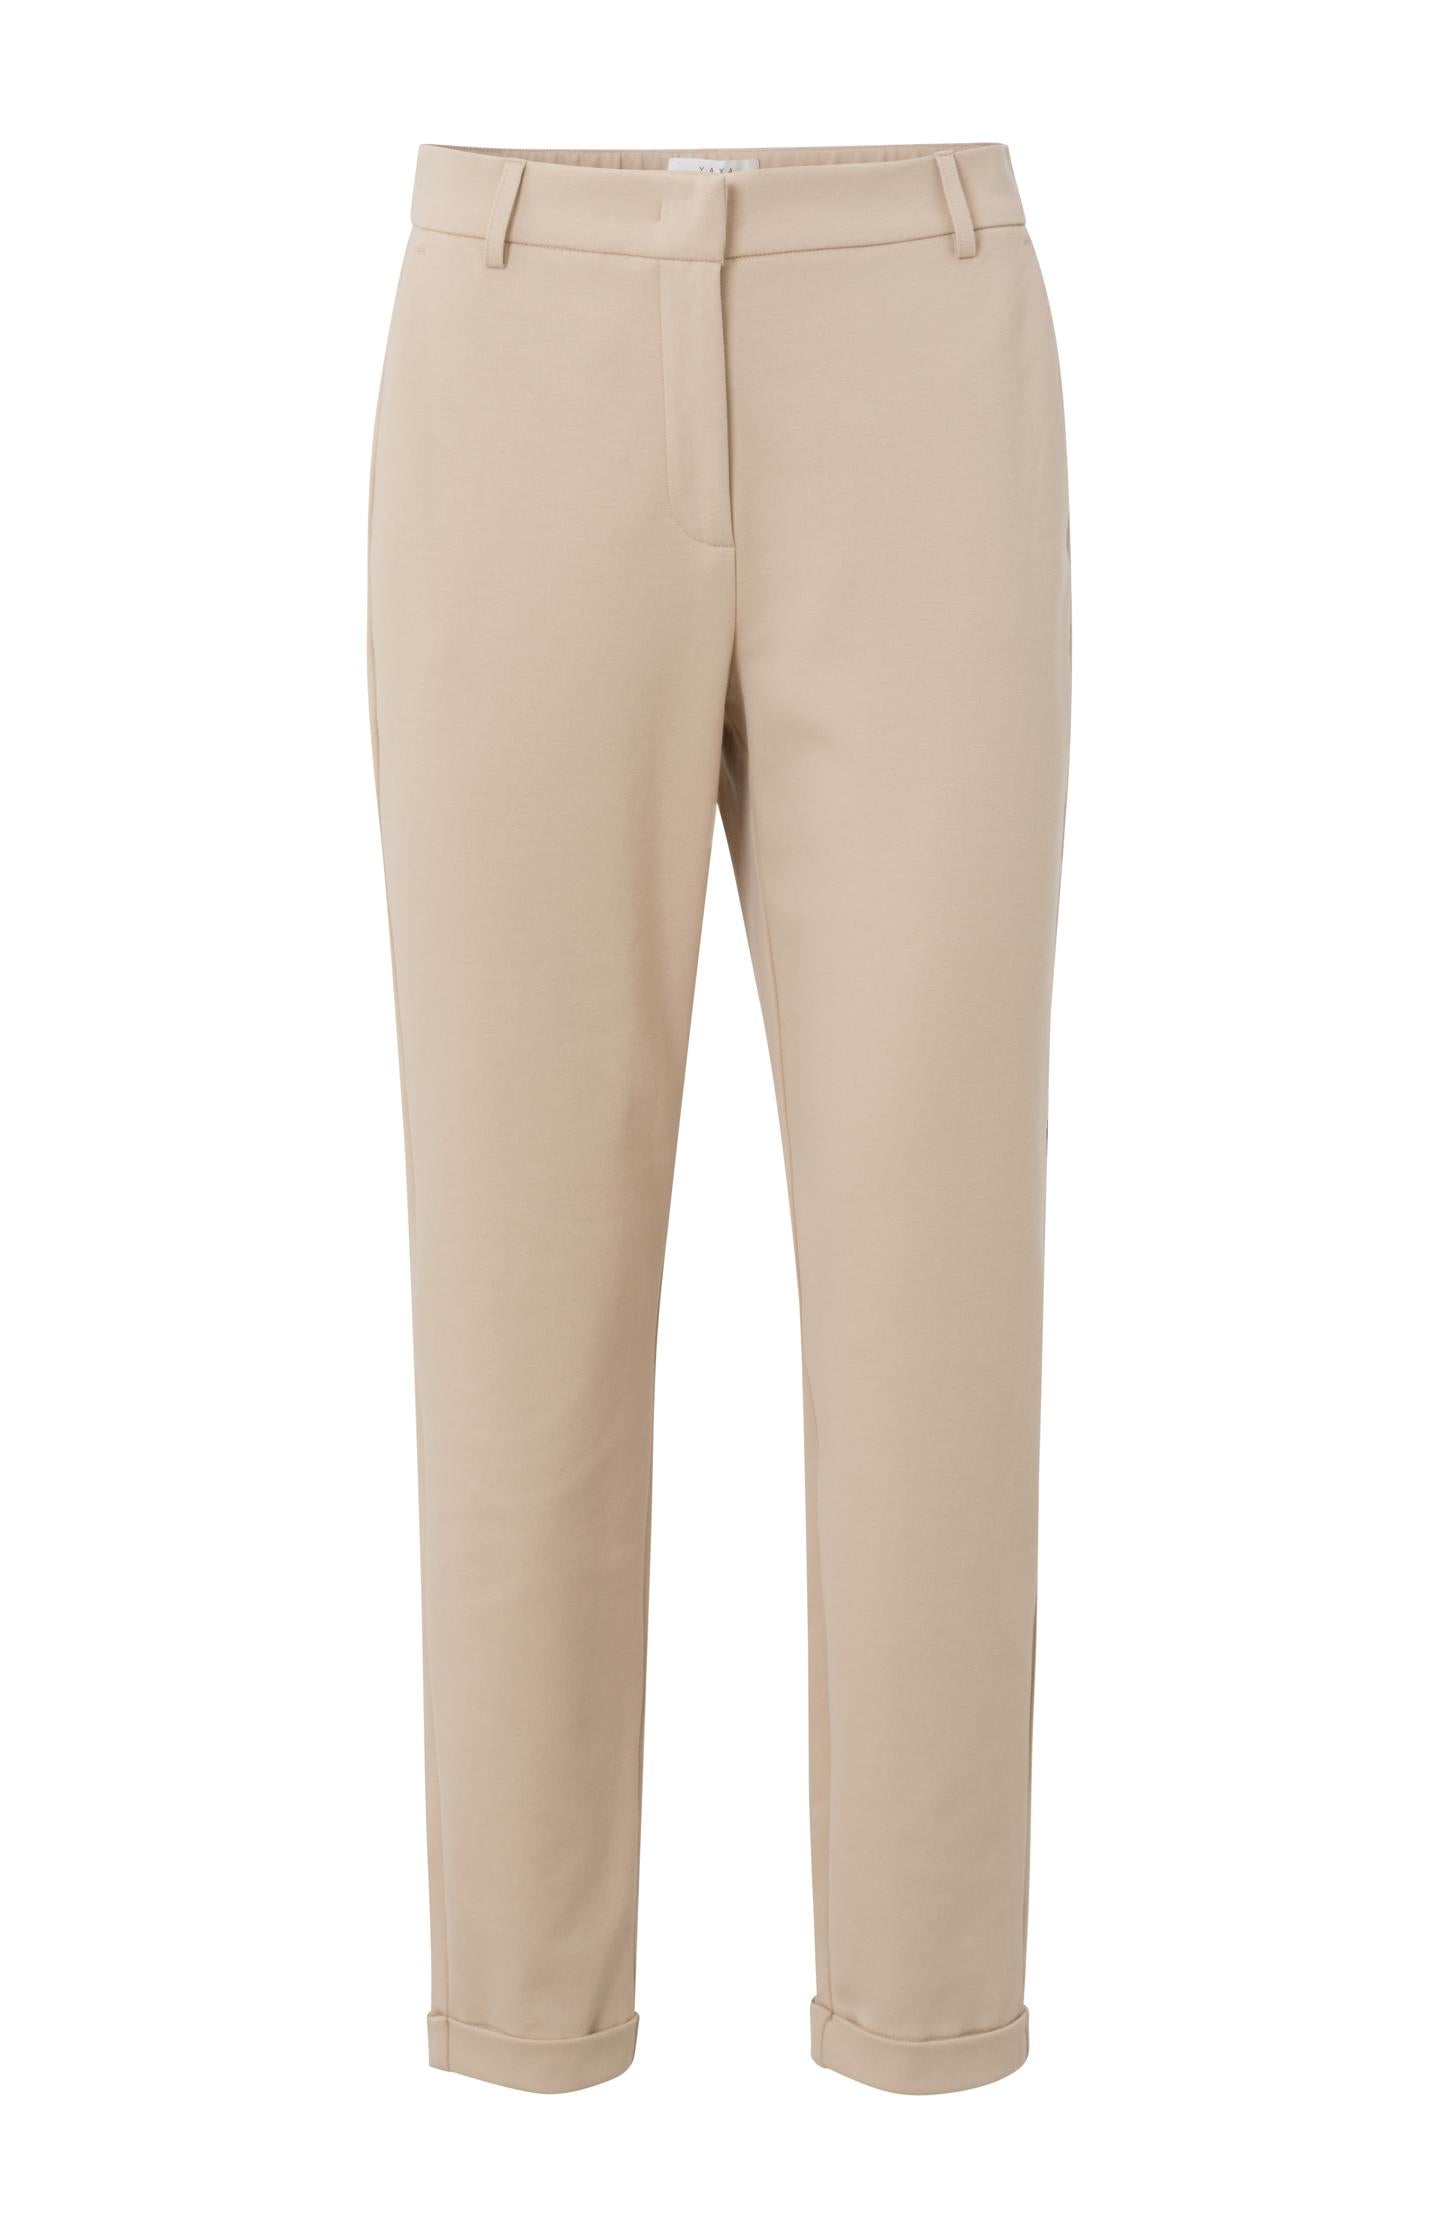 Jersey chino with straight leg, side pockets and mid waist - Type: product